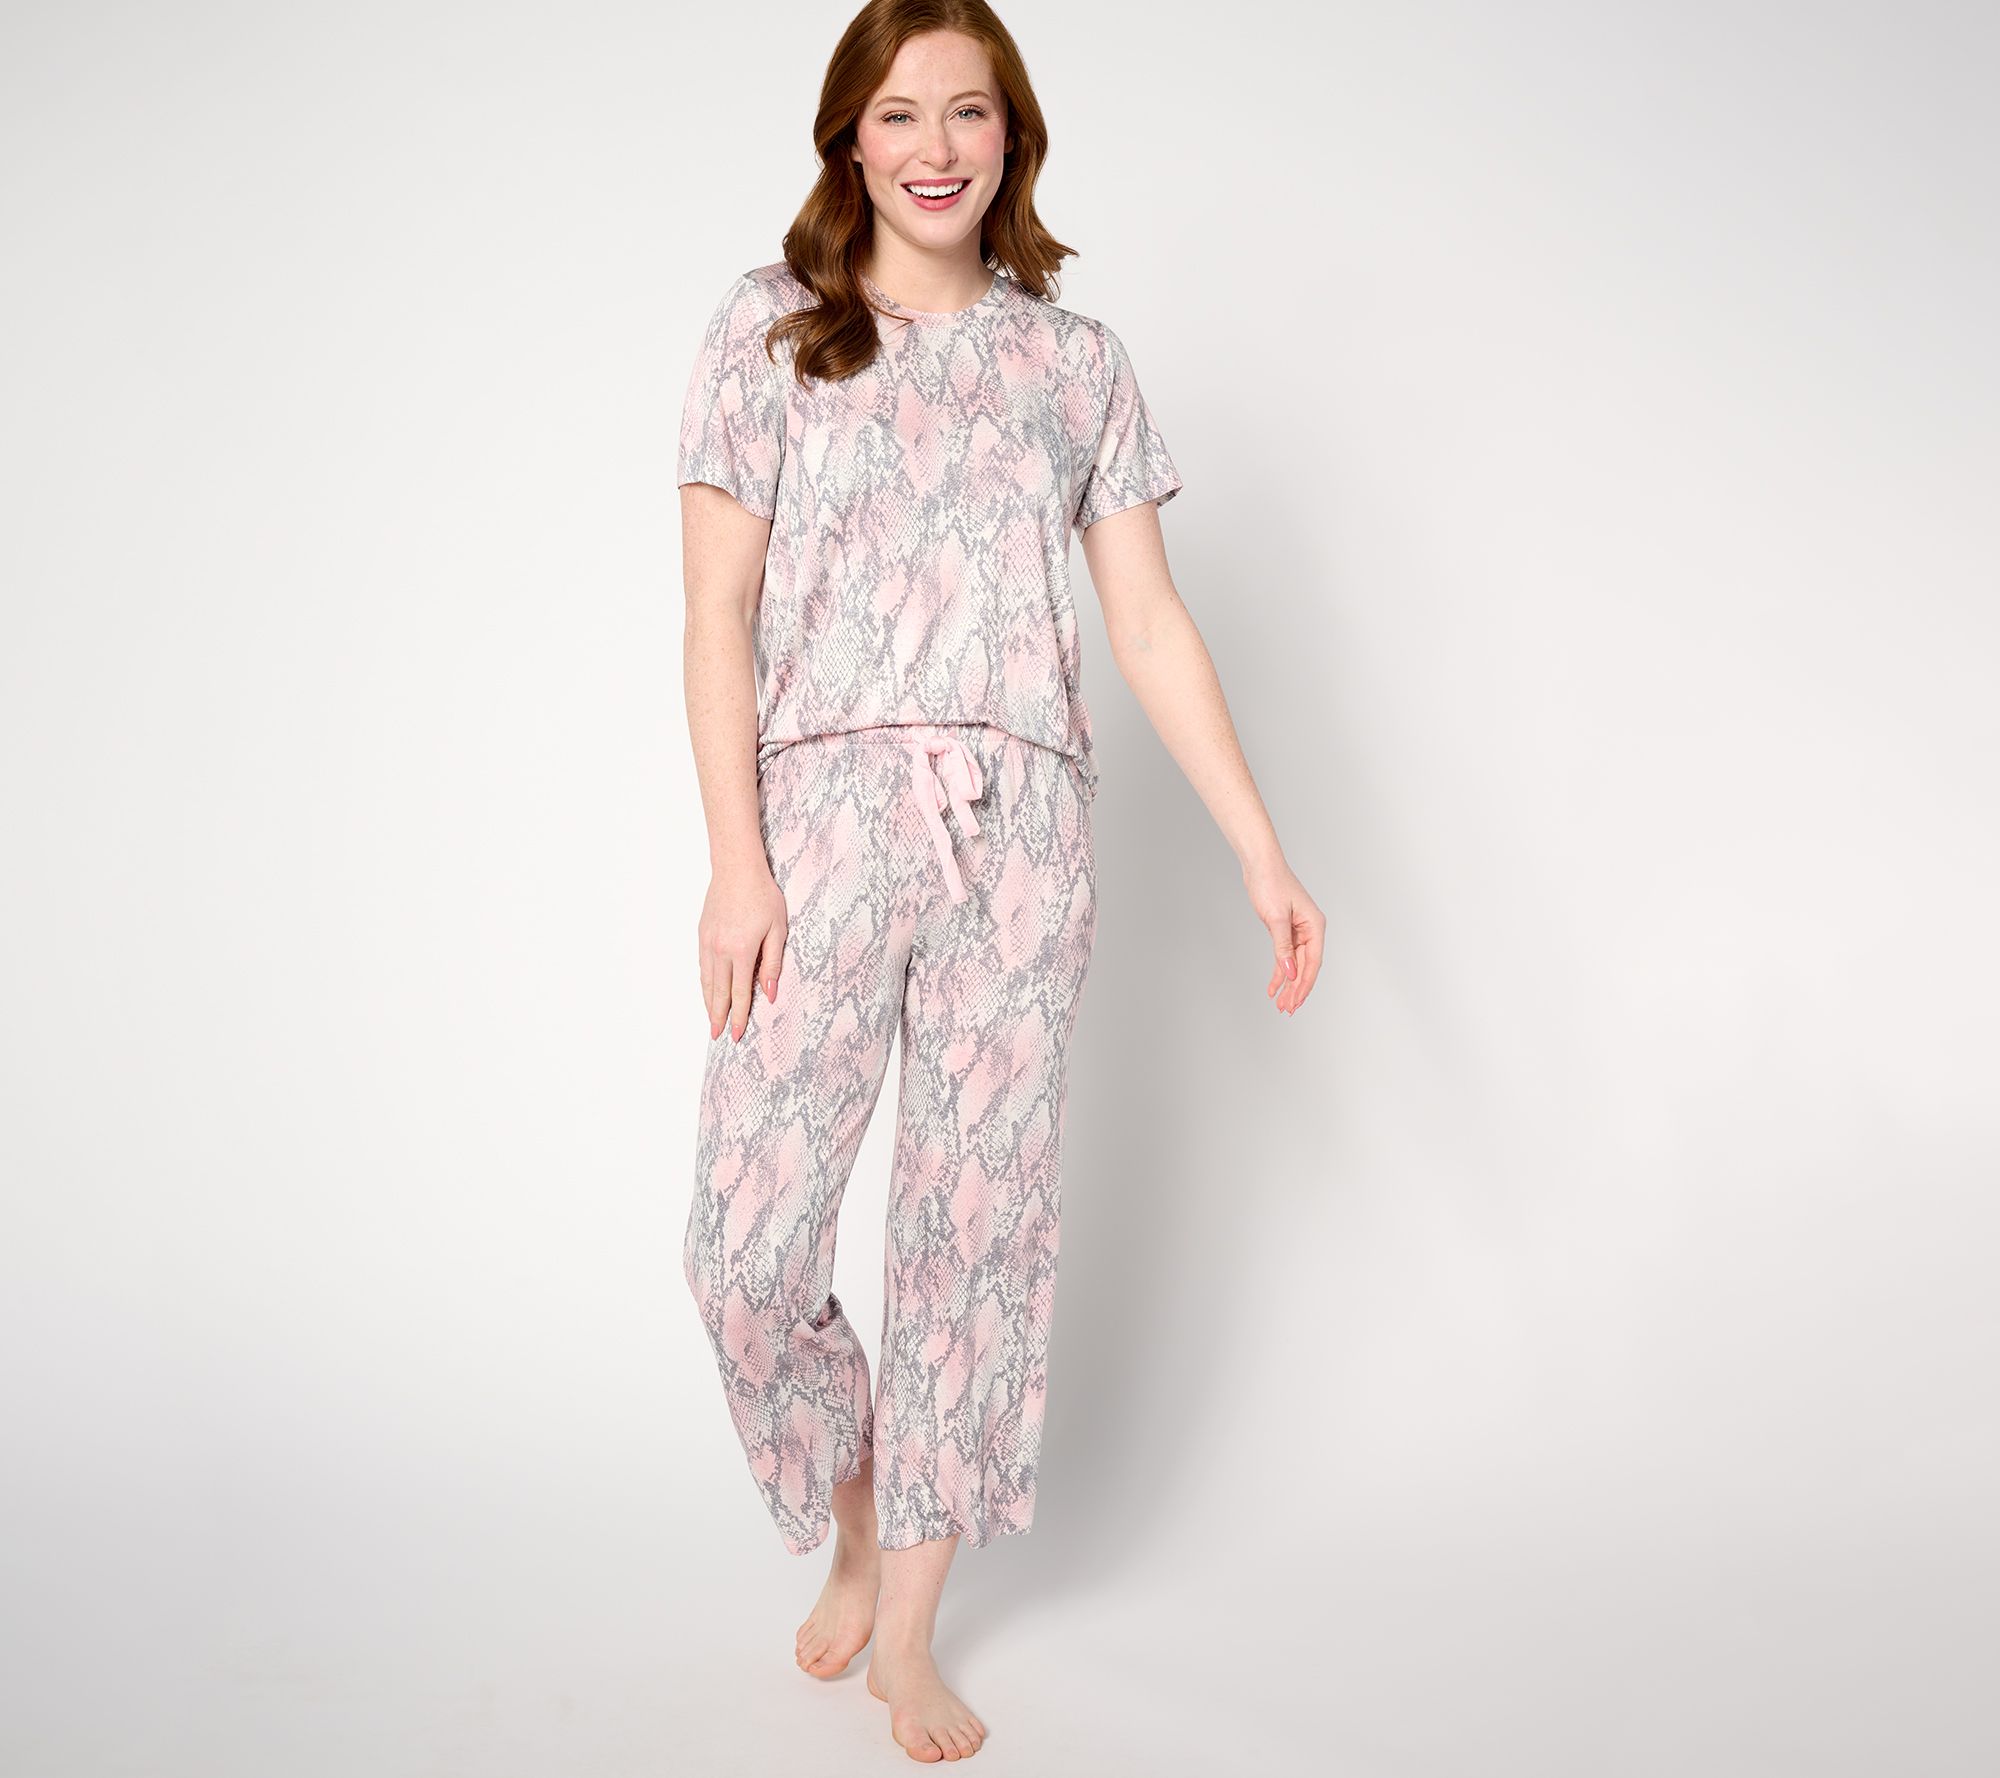 Valerie  Night Dress For men classic nightwear/sleepwear is designed  ultimate comfort and style. Our classic pajama set is updated in a smooth  silky fabric.